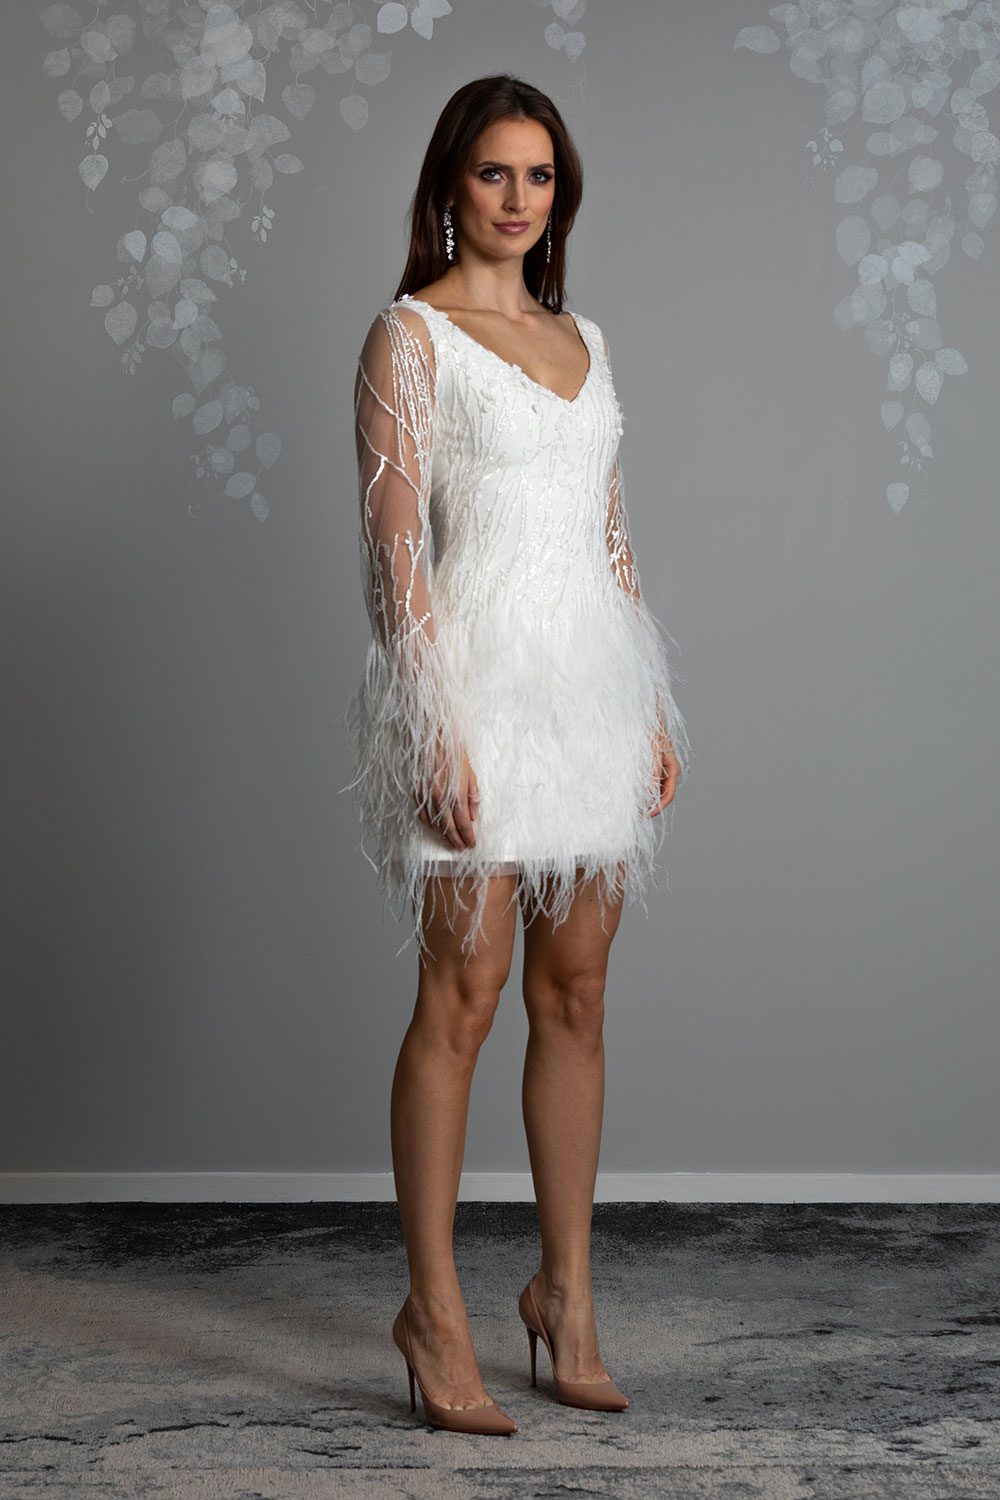 Nikora Wedding gown from Vinka Design - This sexy gown is sure to turn heads! Adorned with feathers that accentuate movement and bell sleeves that add flare, a high neckline, and low back. Semi profile view of model wearing mini dress with bell sleeves adorned with beads and feathers and V neckline